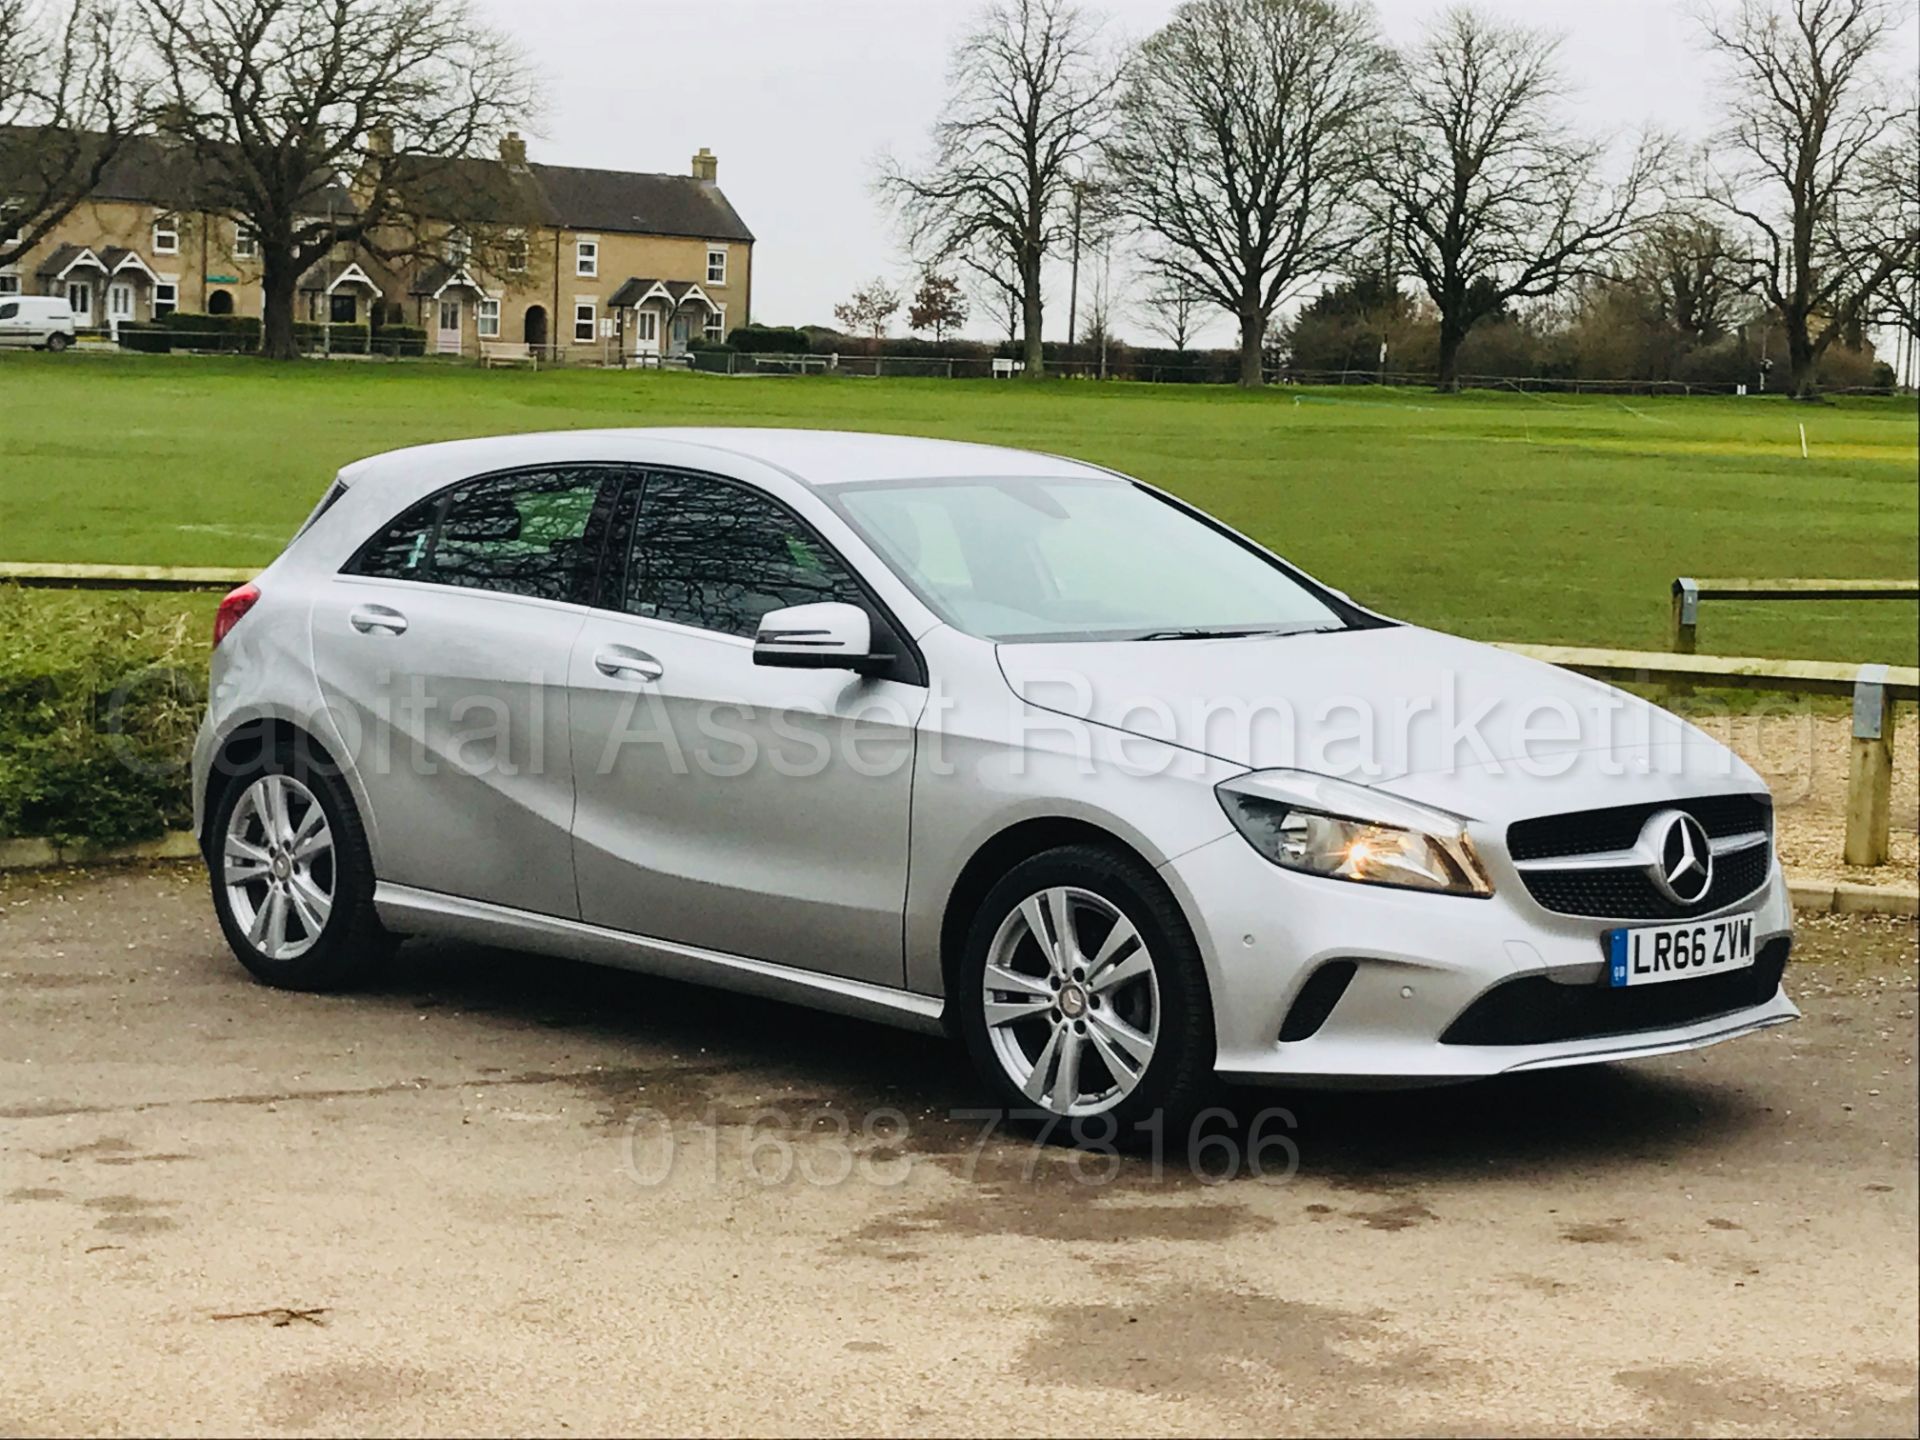 MERCEDES-BENZ A180D 'SPORT' (2017 MODEL) '7G TRONIC AUTO - LEATHER - SAT NAV' (1 OWNER FROM NEW)